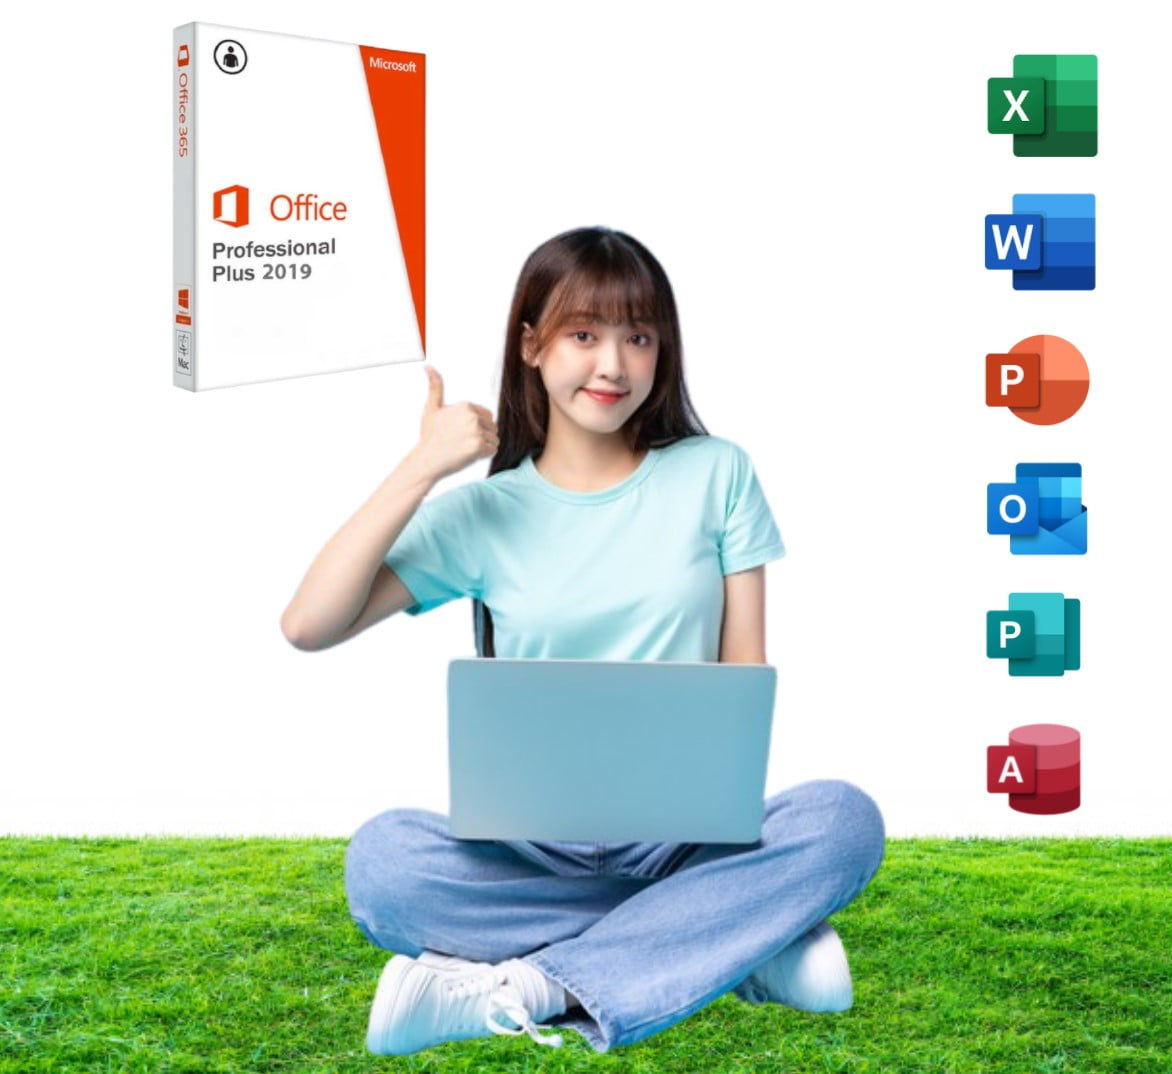 about Microsoft Office Professional Plus 2019